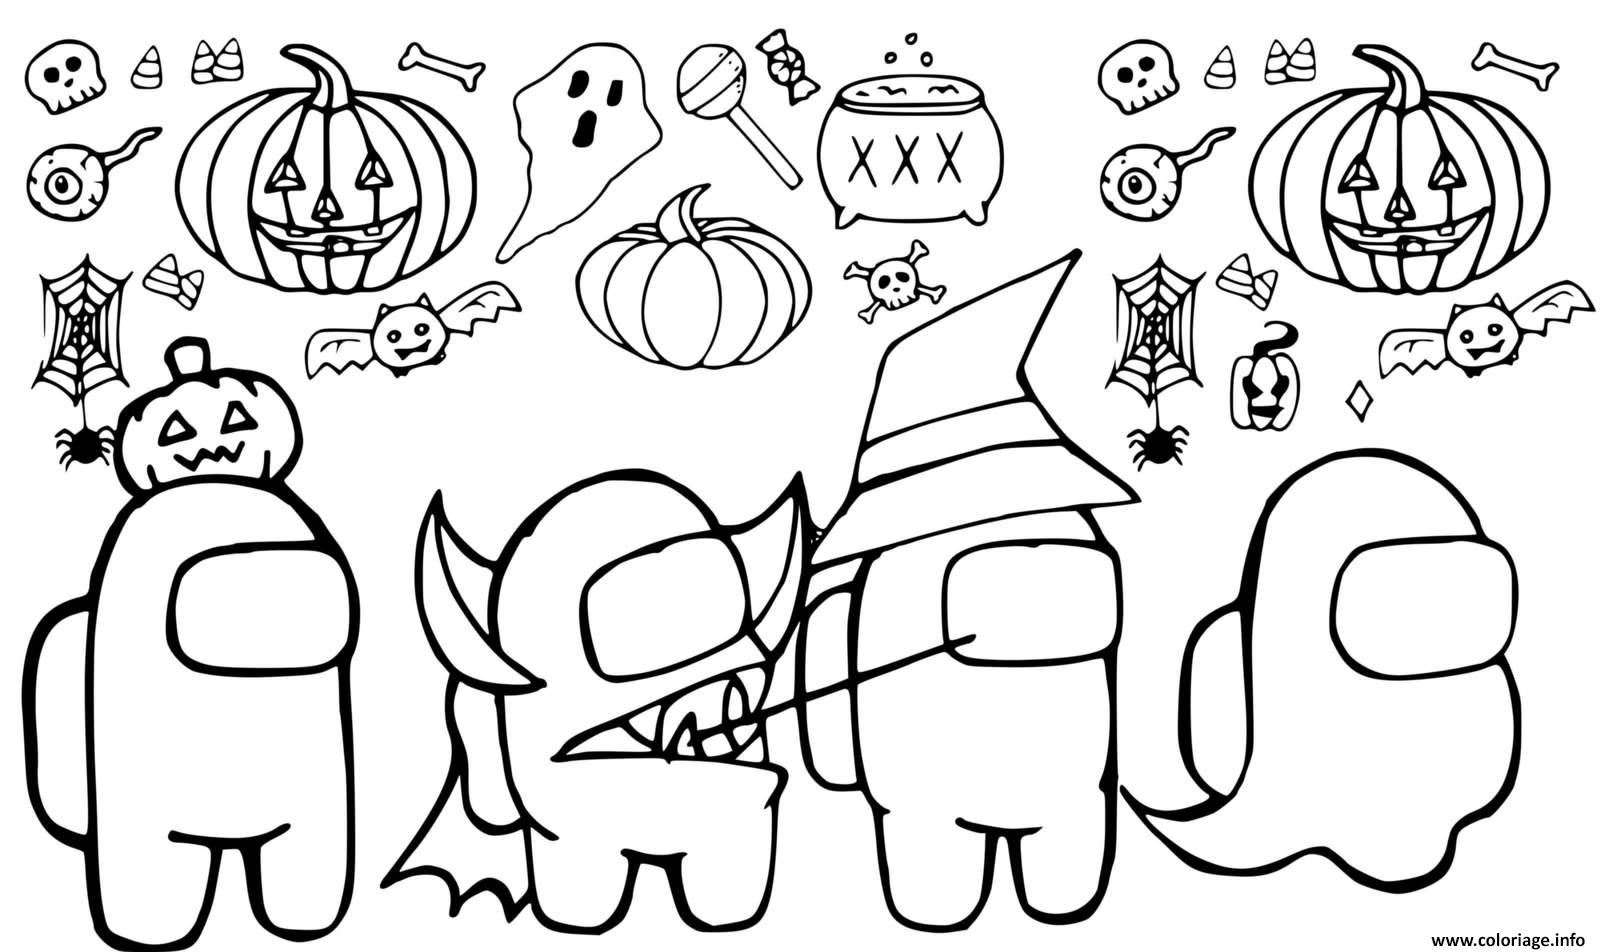 Coloriage among us halloween  JeColorie.com